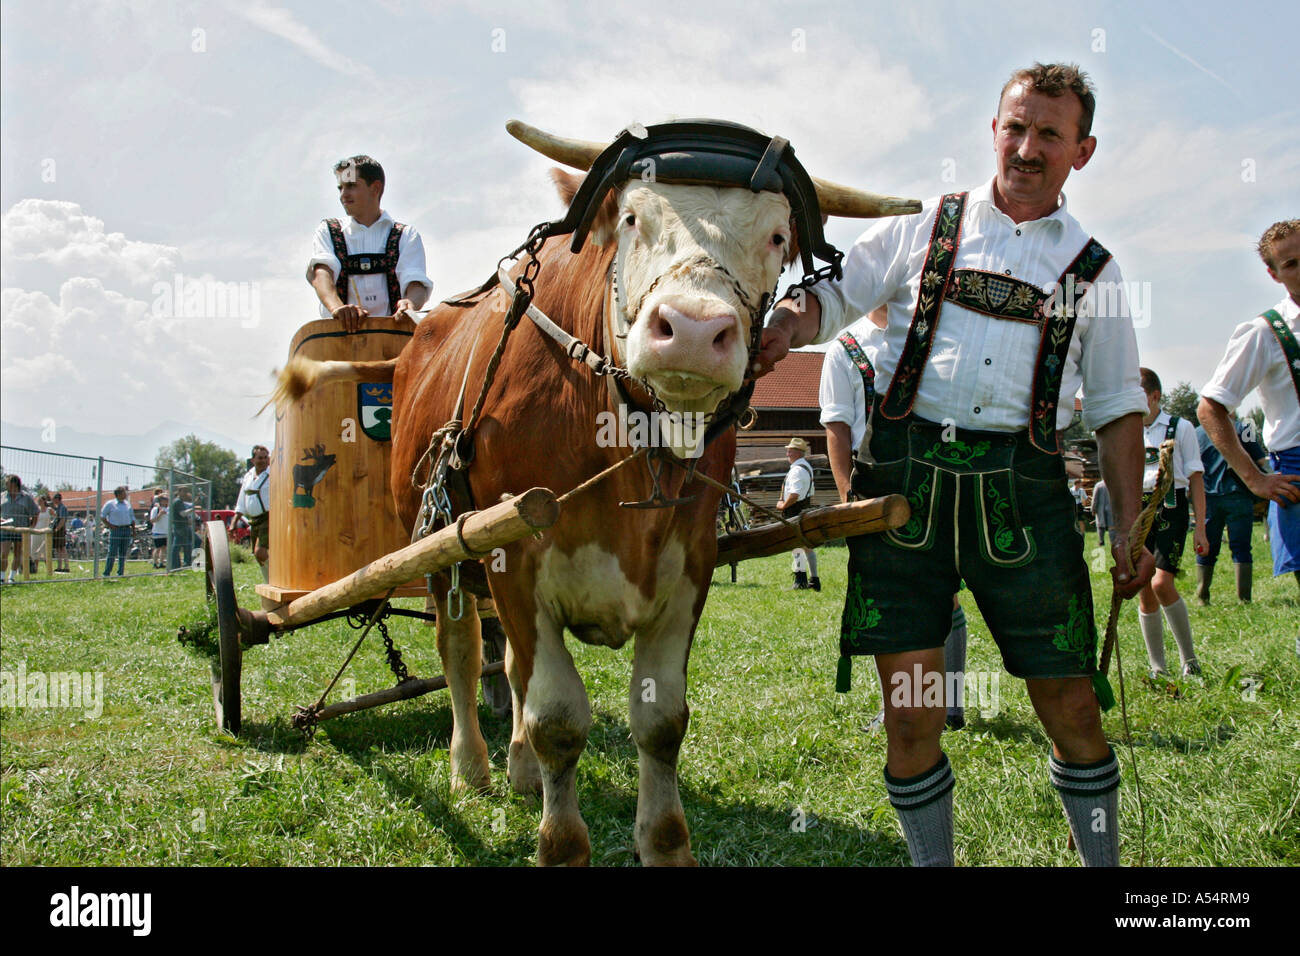 First oxrace of Bichl, August 8th 2004, Upper Bavaria, Germany Stock Photo